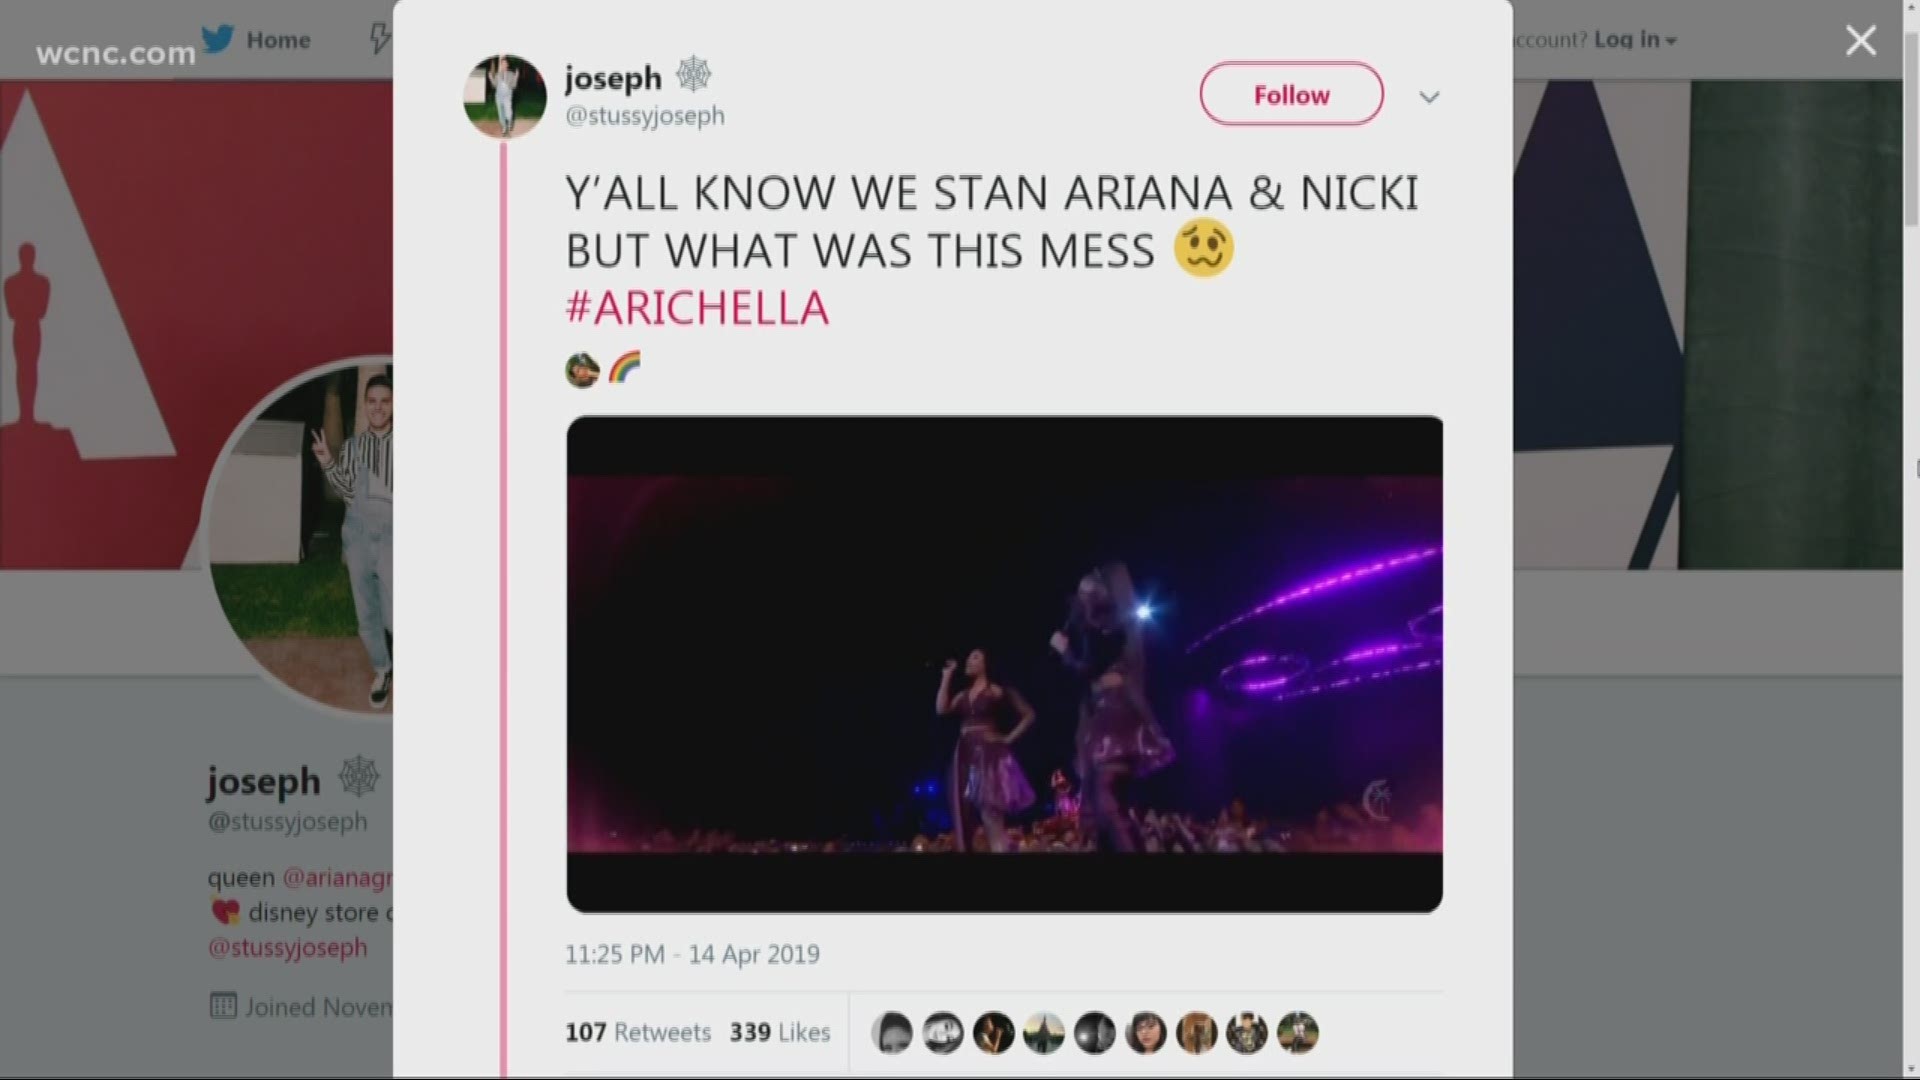 The new season of "Game of Thrones" debuted Sunday but it wasn't the only thing trending, as Ariana Grande's performance with Nicki Minaj at Coachella had millions of people talking after an obvious technical failure.